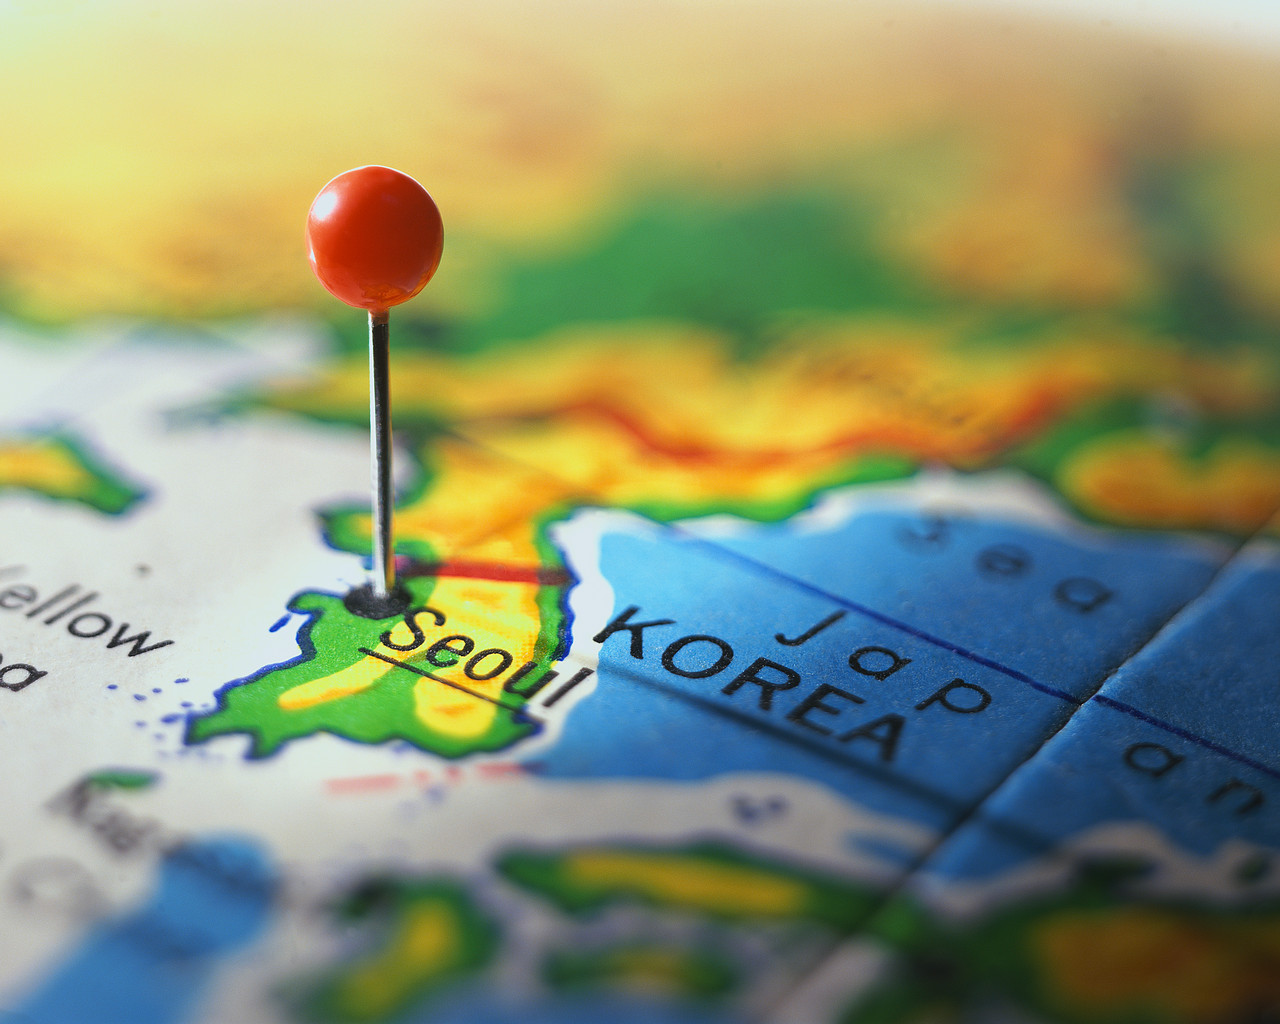 Seoul Marked on a Map